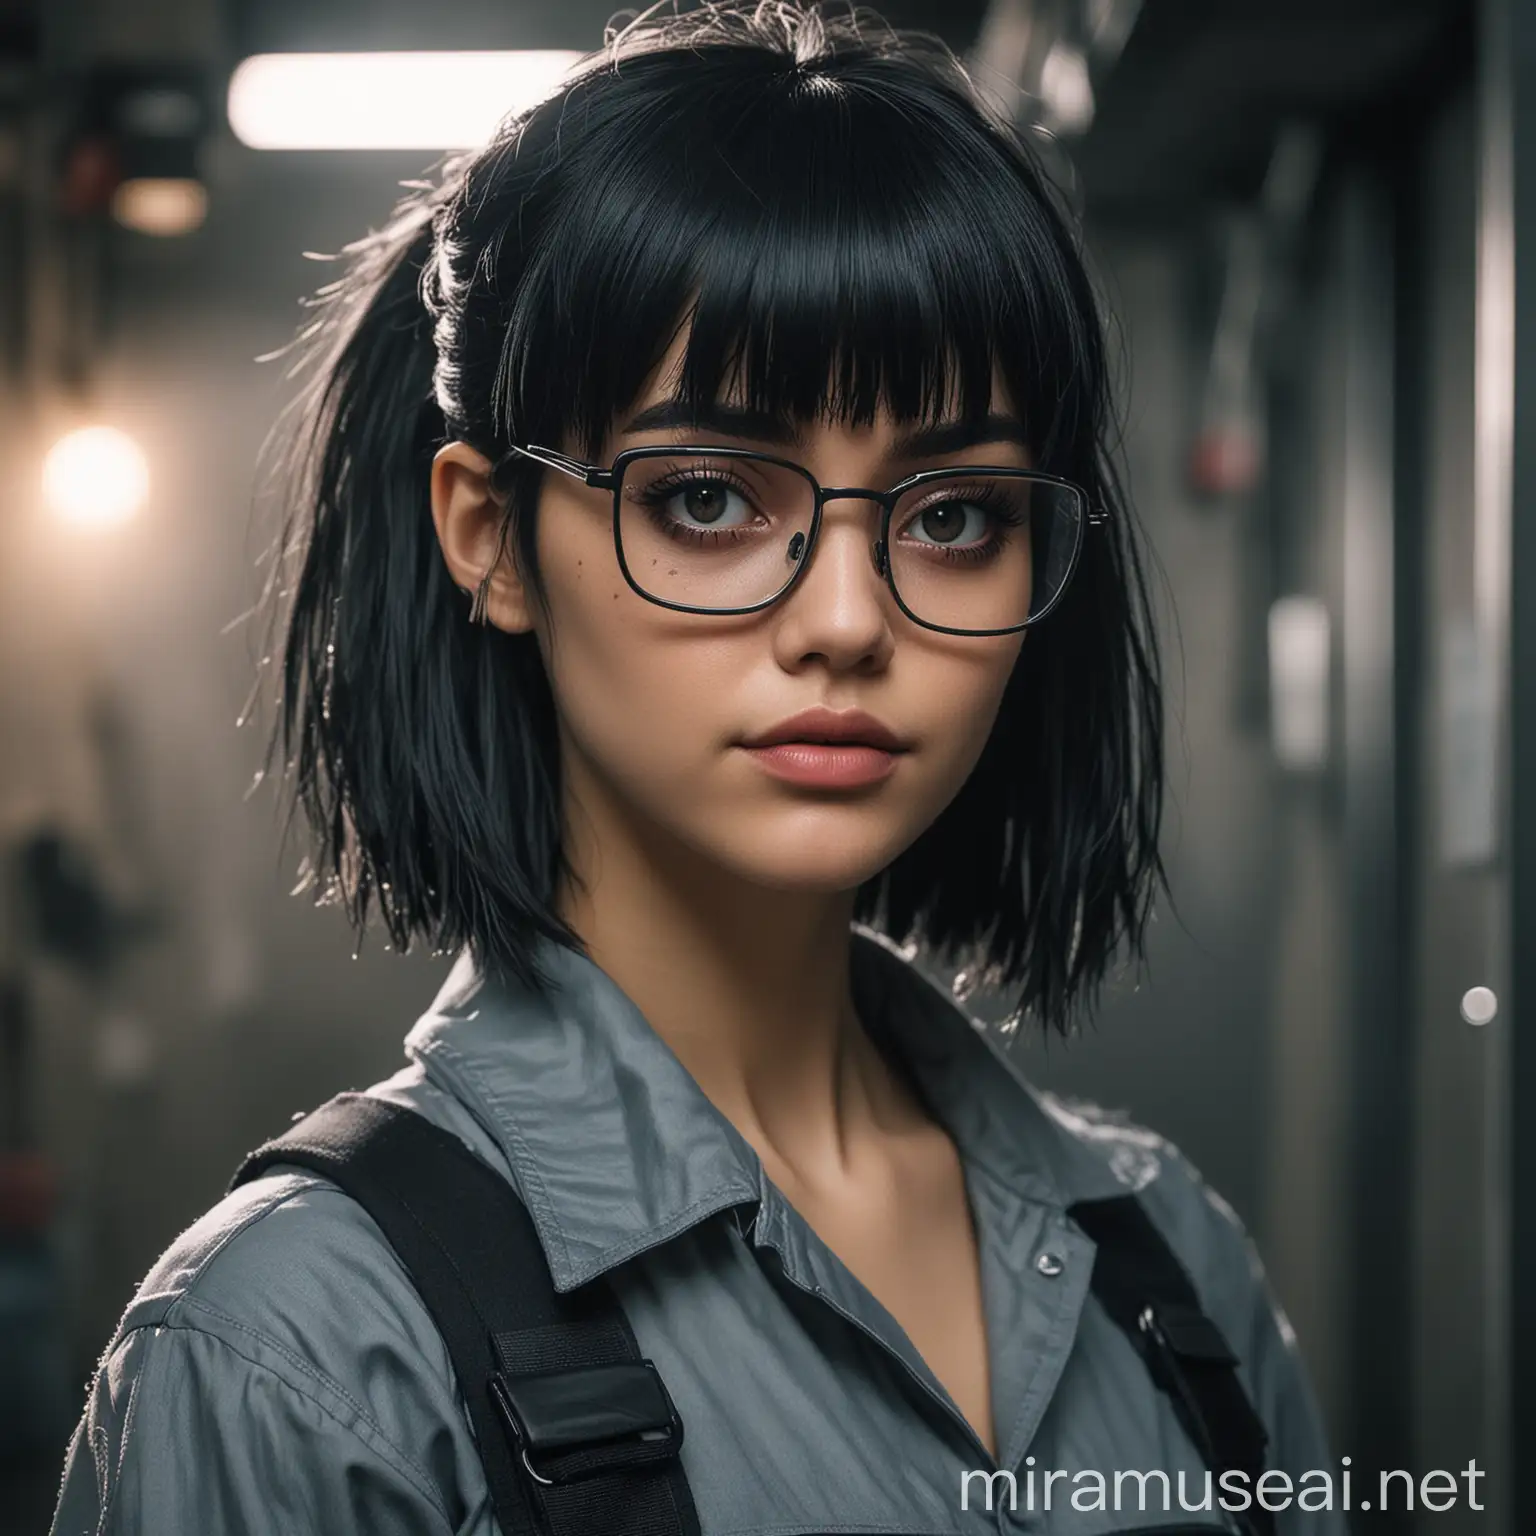 Cyberpunk Janitor Woman with Black Bobbed Hair and Eyeglasses